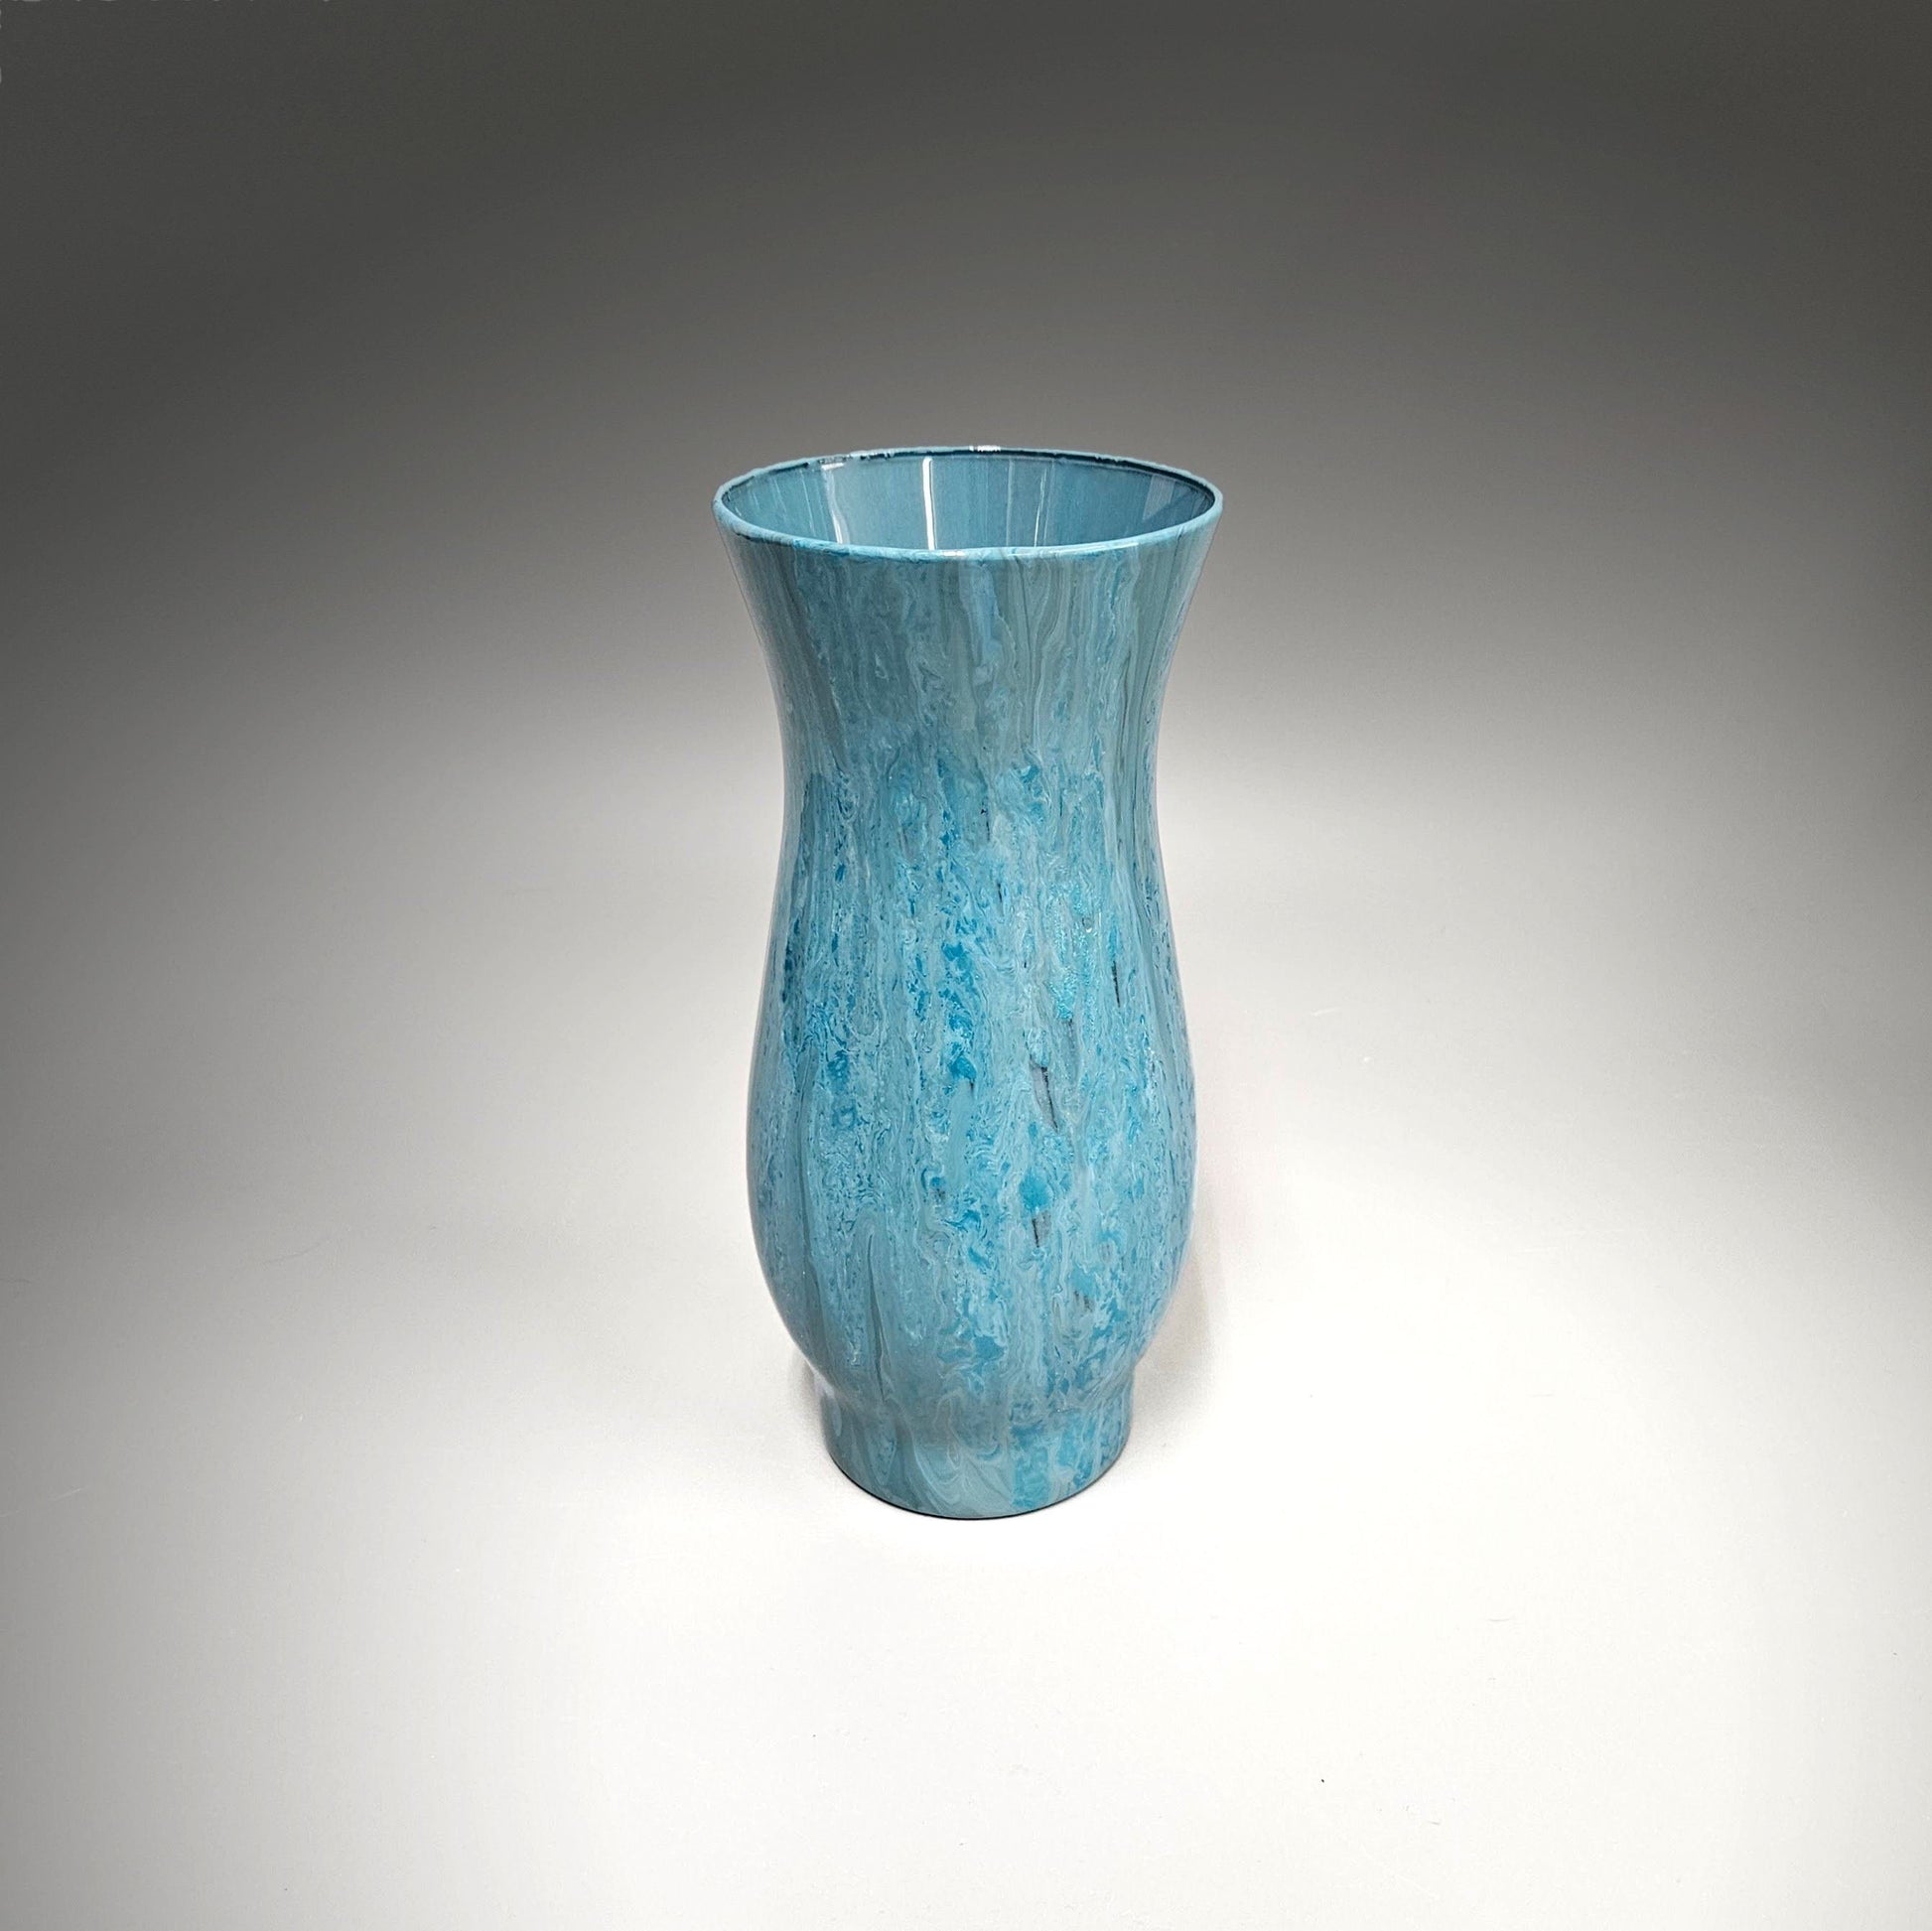 Fluid Art Glass Vase in Aqua Teal and Gray | One of a Kind Gift Ideas